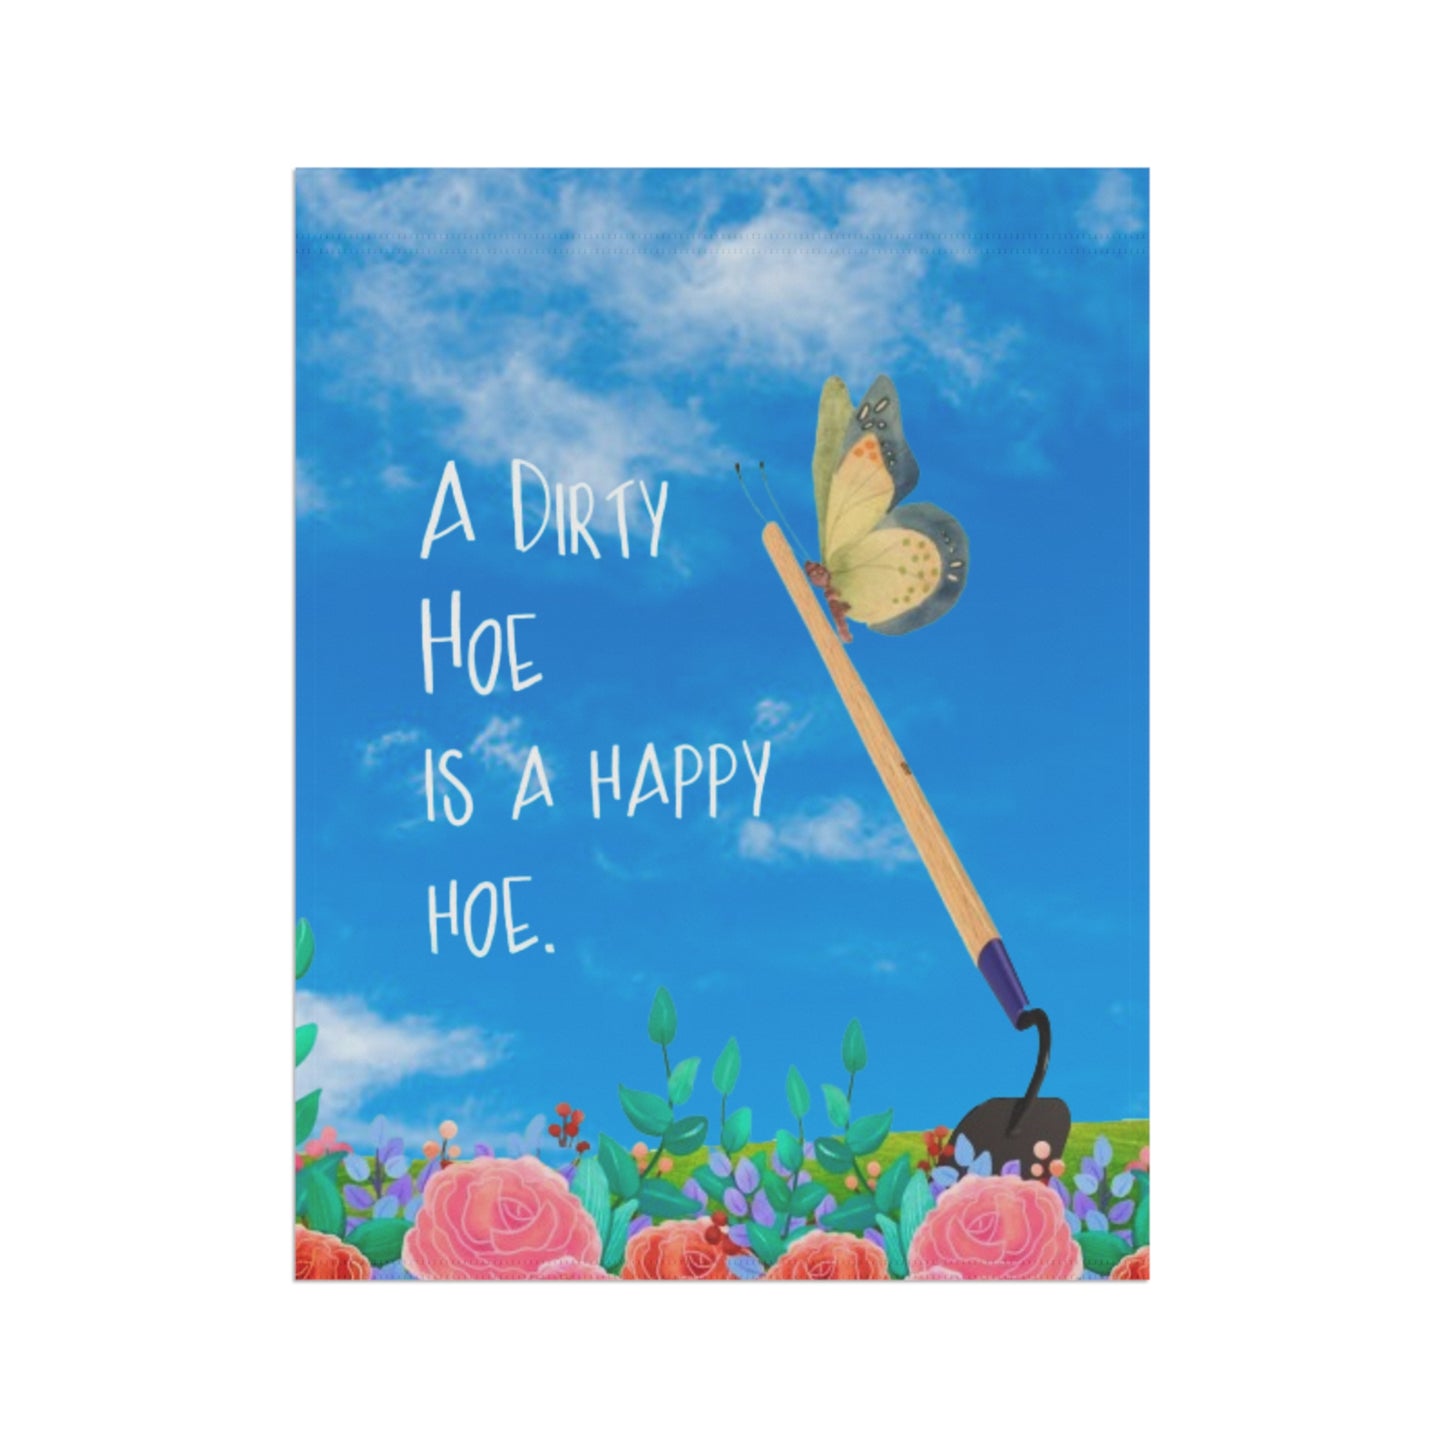 A dirty hoe is a happy hoe - Garden & House Banner